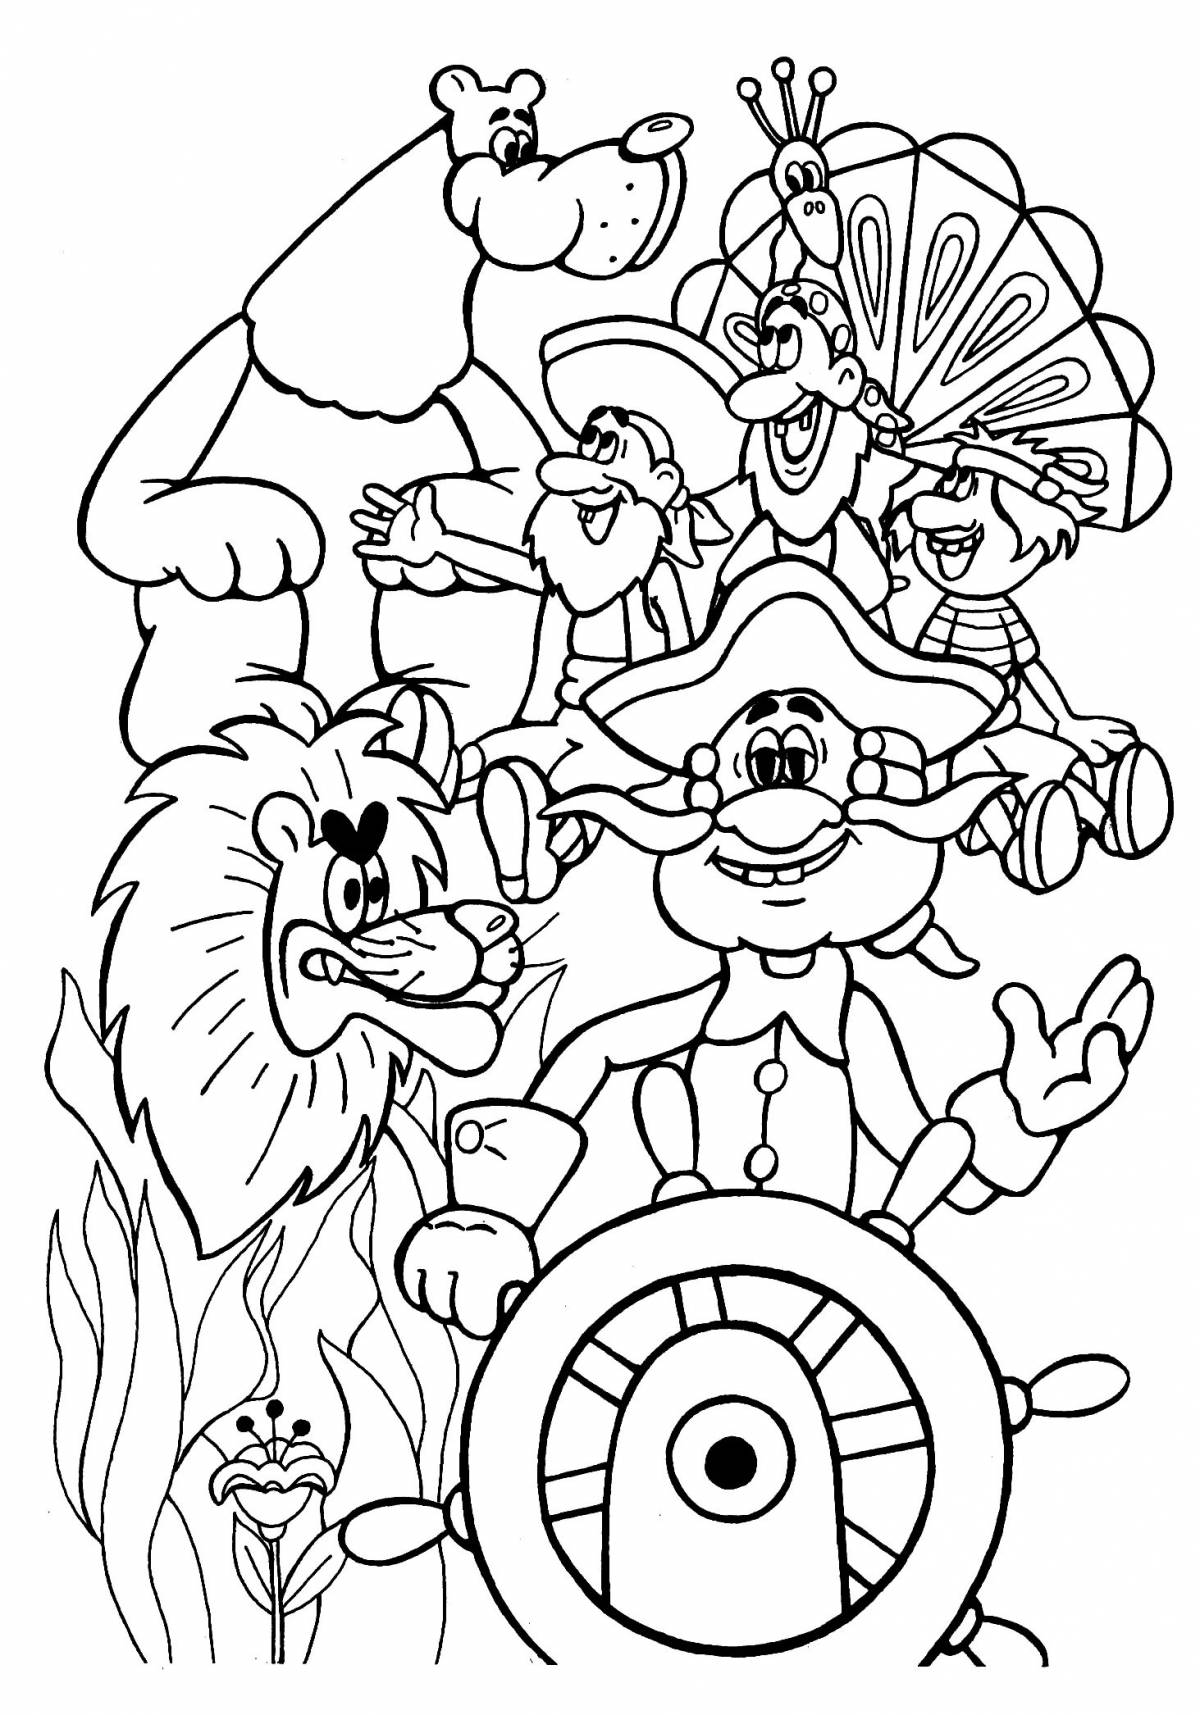 Munchausen's playful coloring page